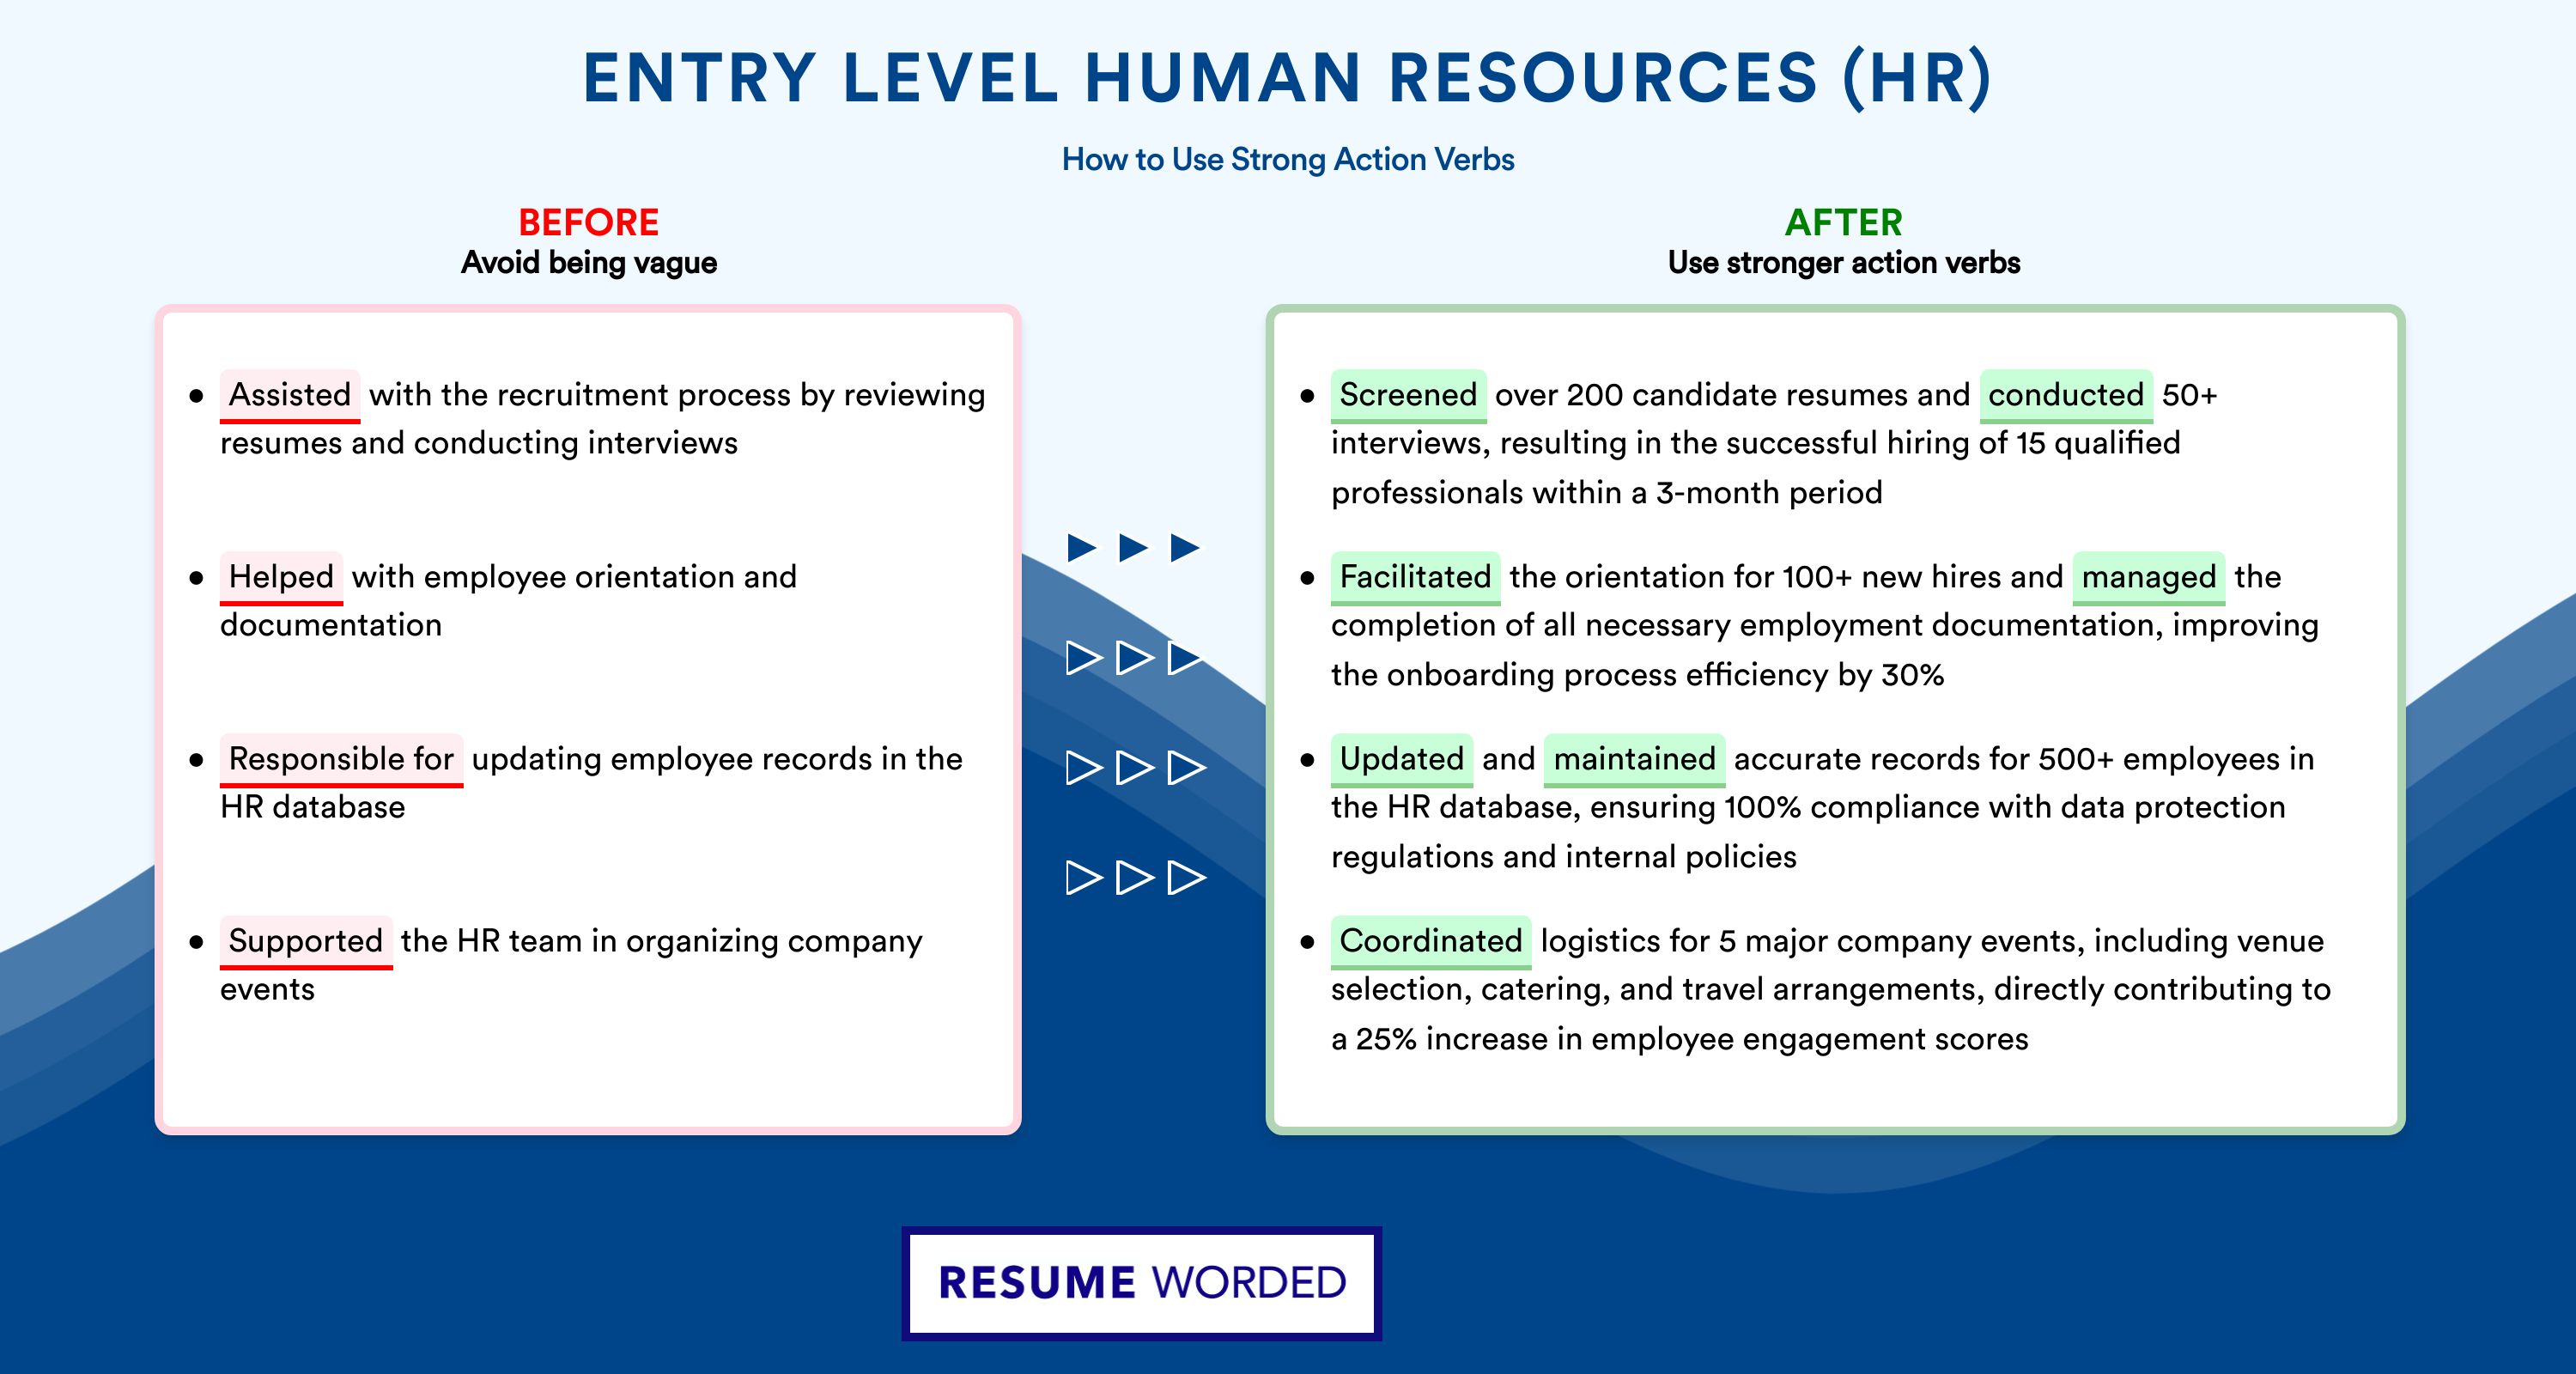 Action Verbs for Entry Level Human Resources (HR)